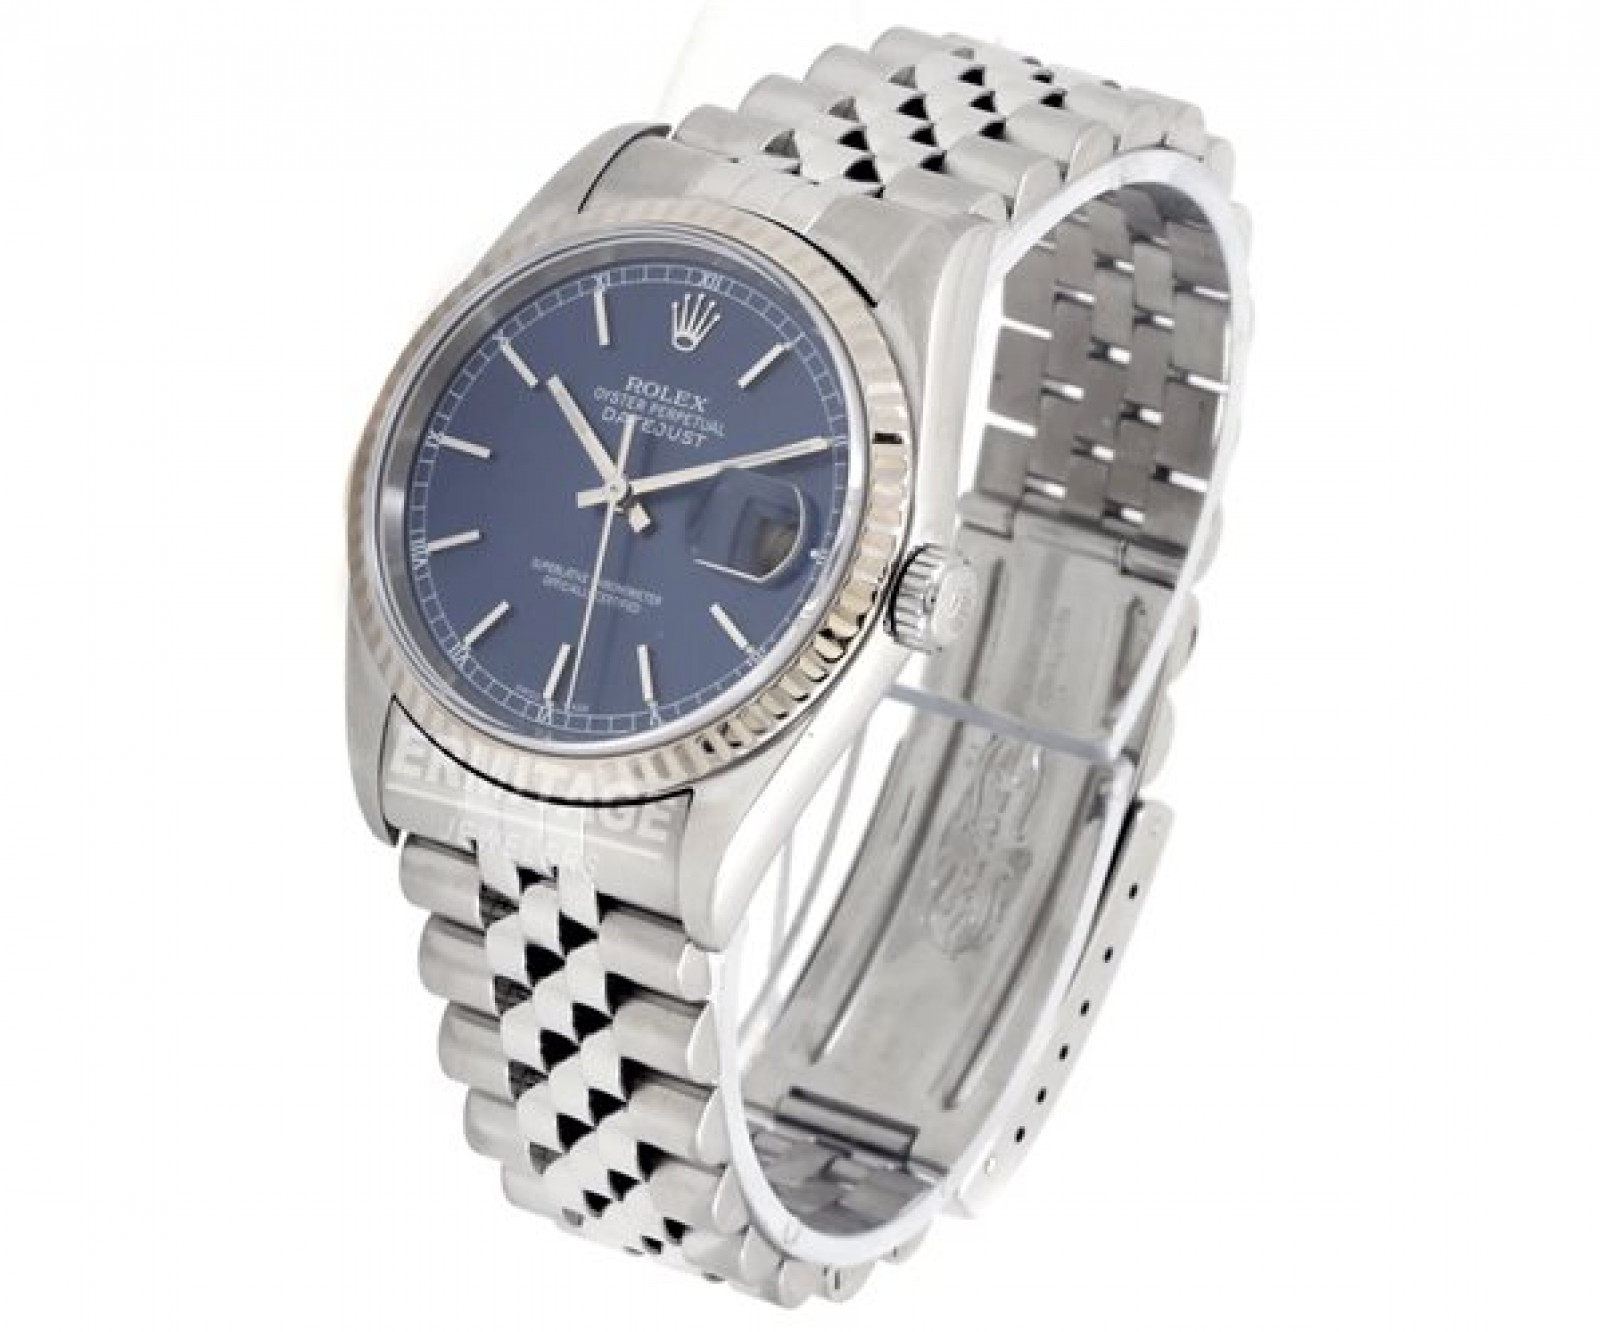 Rolex Oyster Perpetual Datejust 16234 Steel